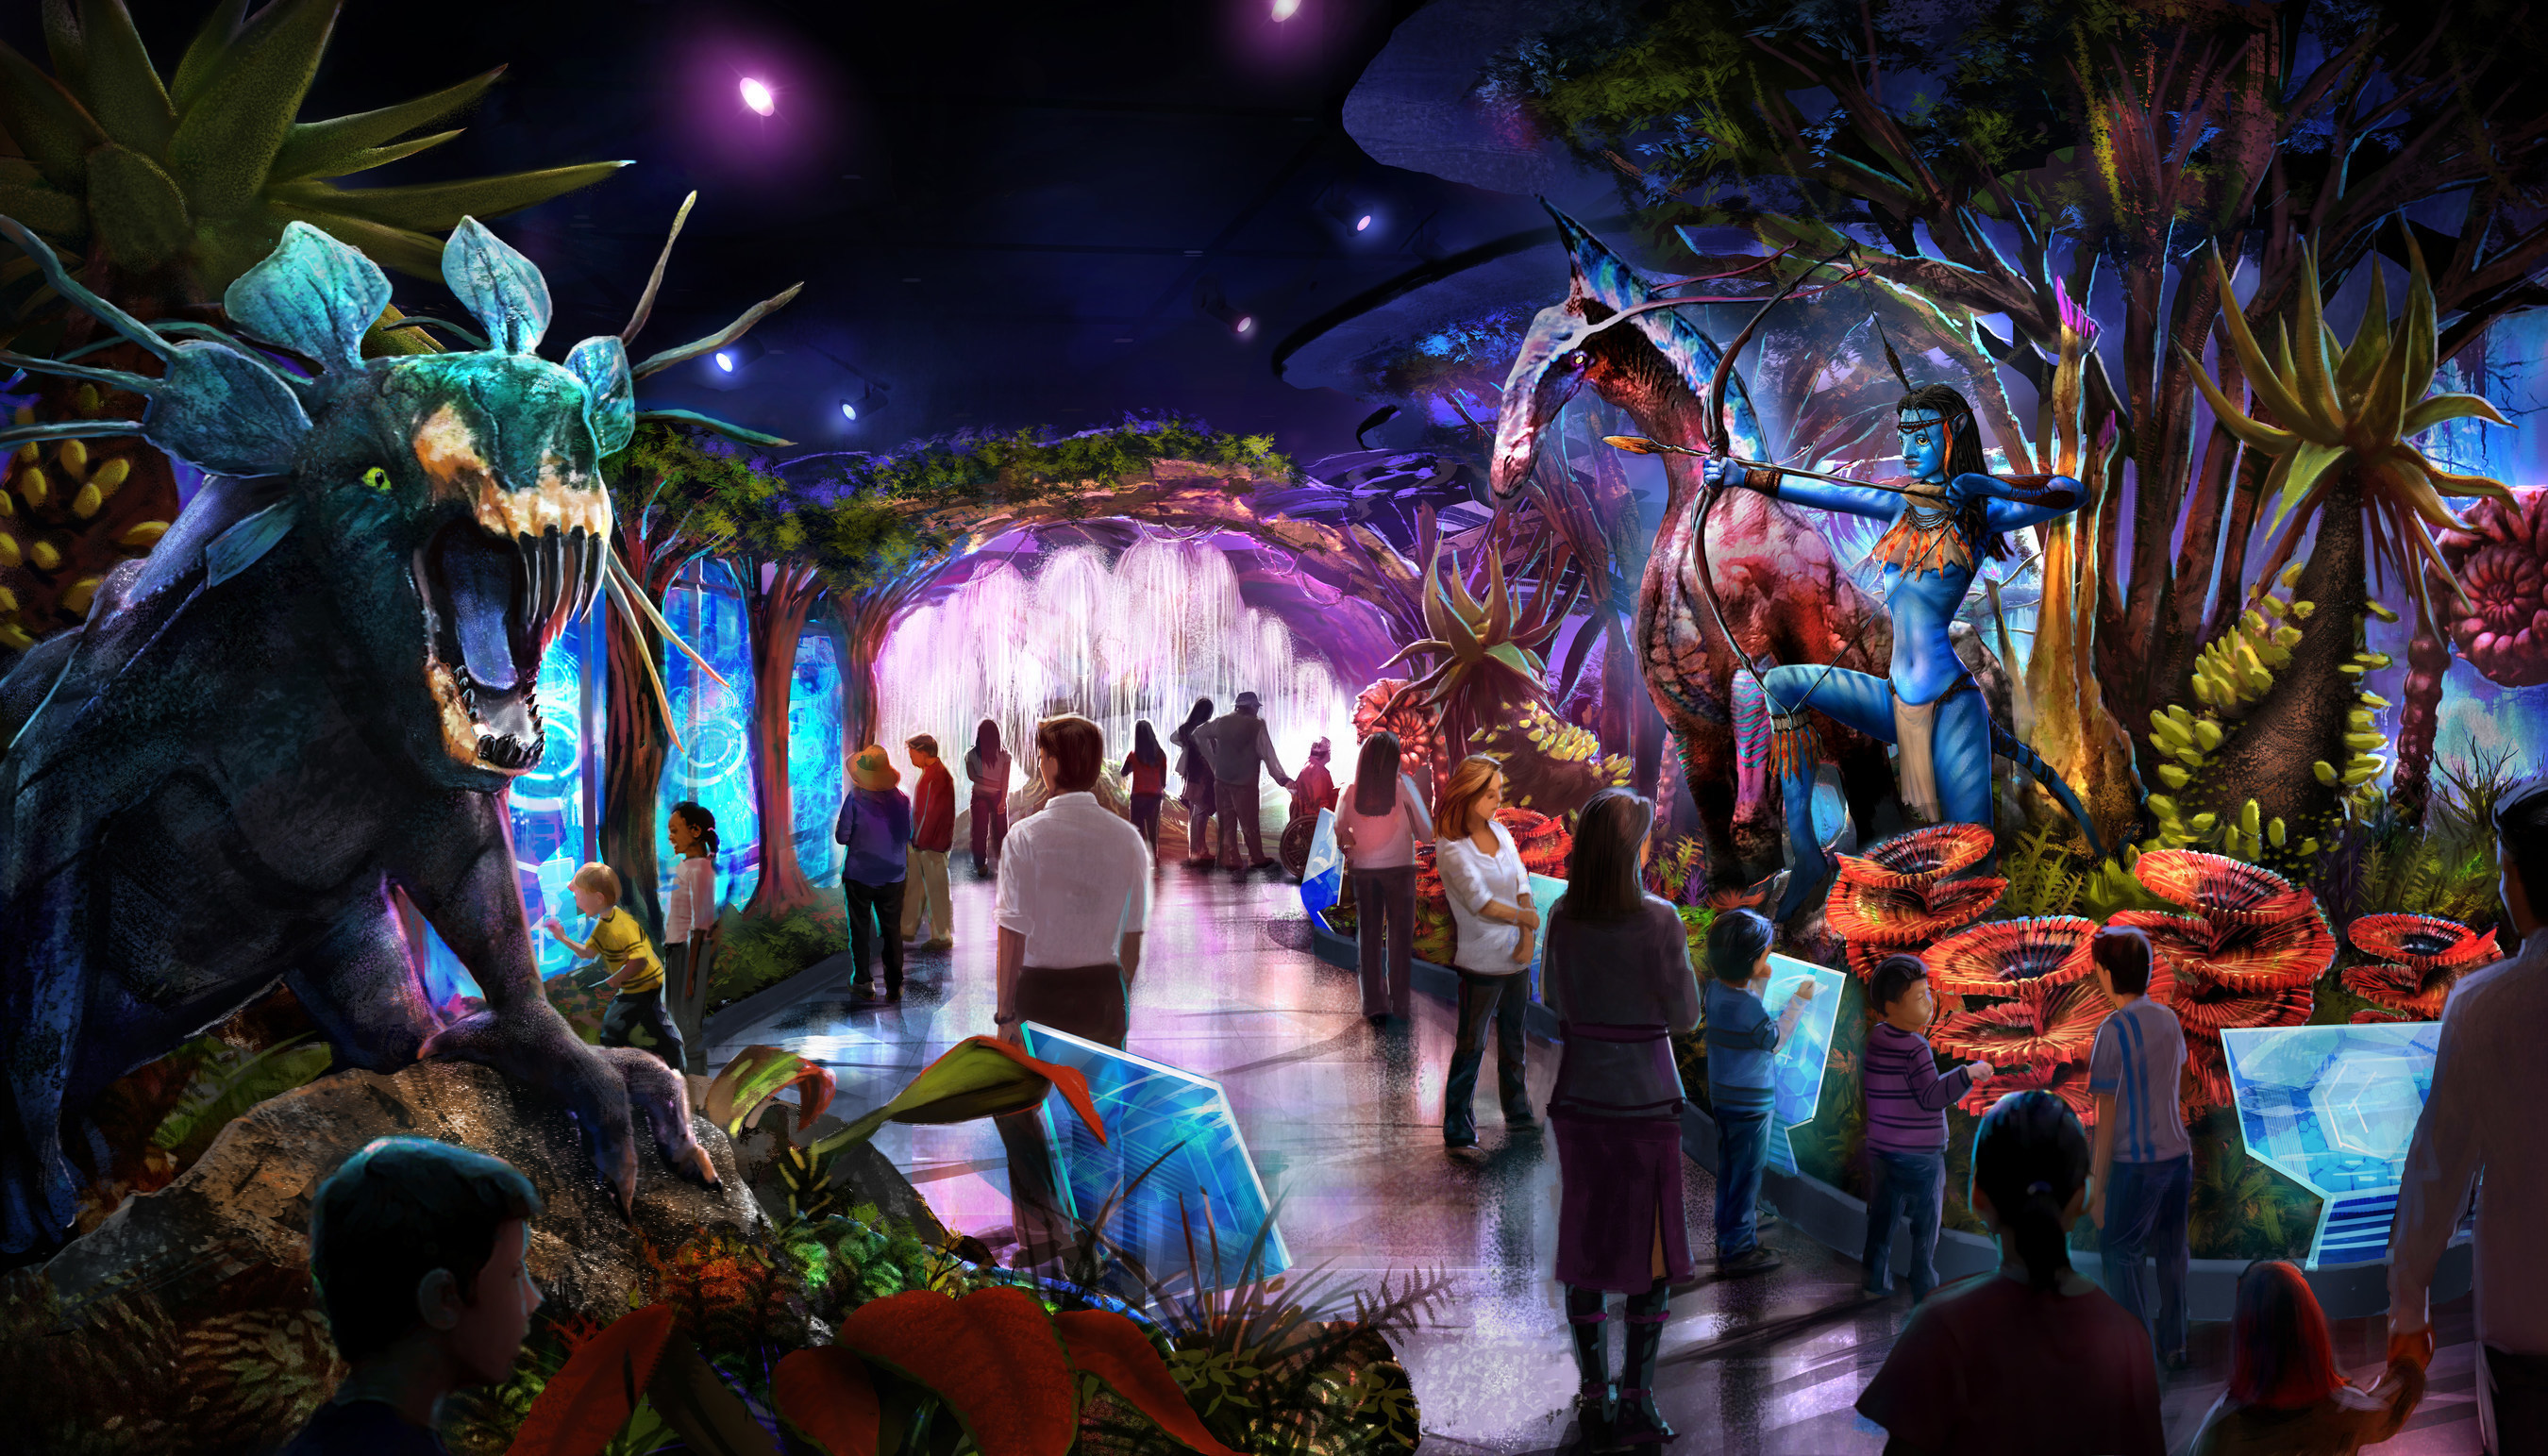 JAMES CAMERON'S AVATAR(TM) GLOBAL EXHIBITION COMING FALL 2016 (Concept Art)